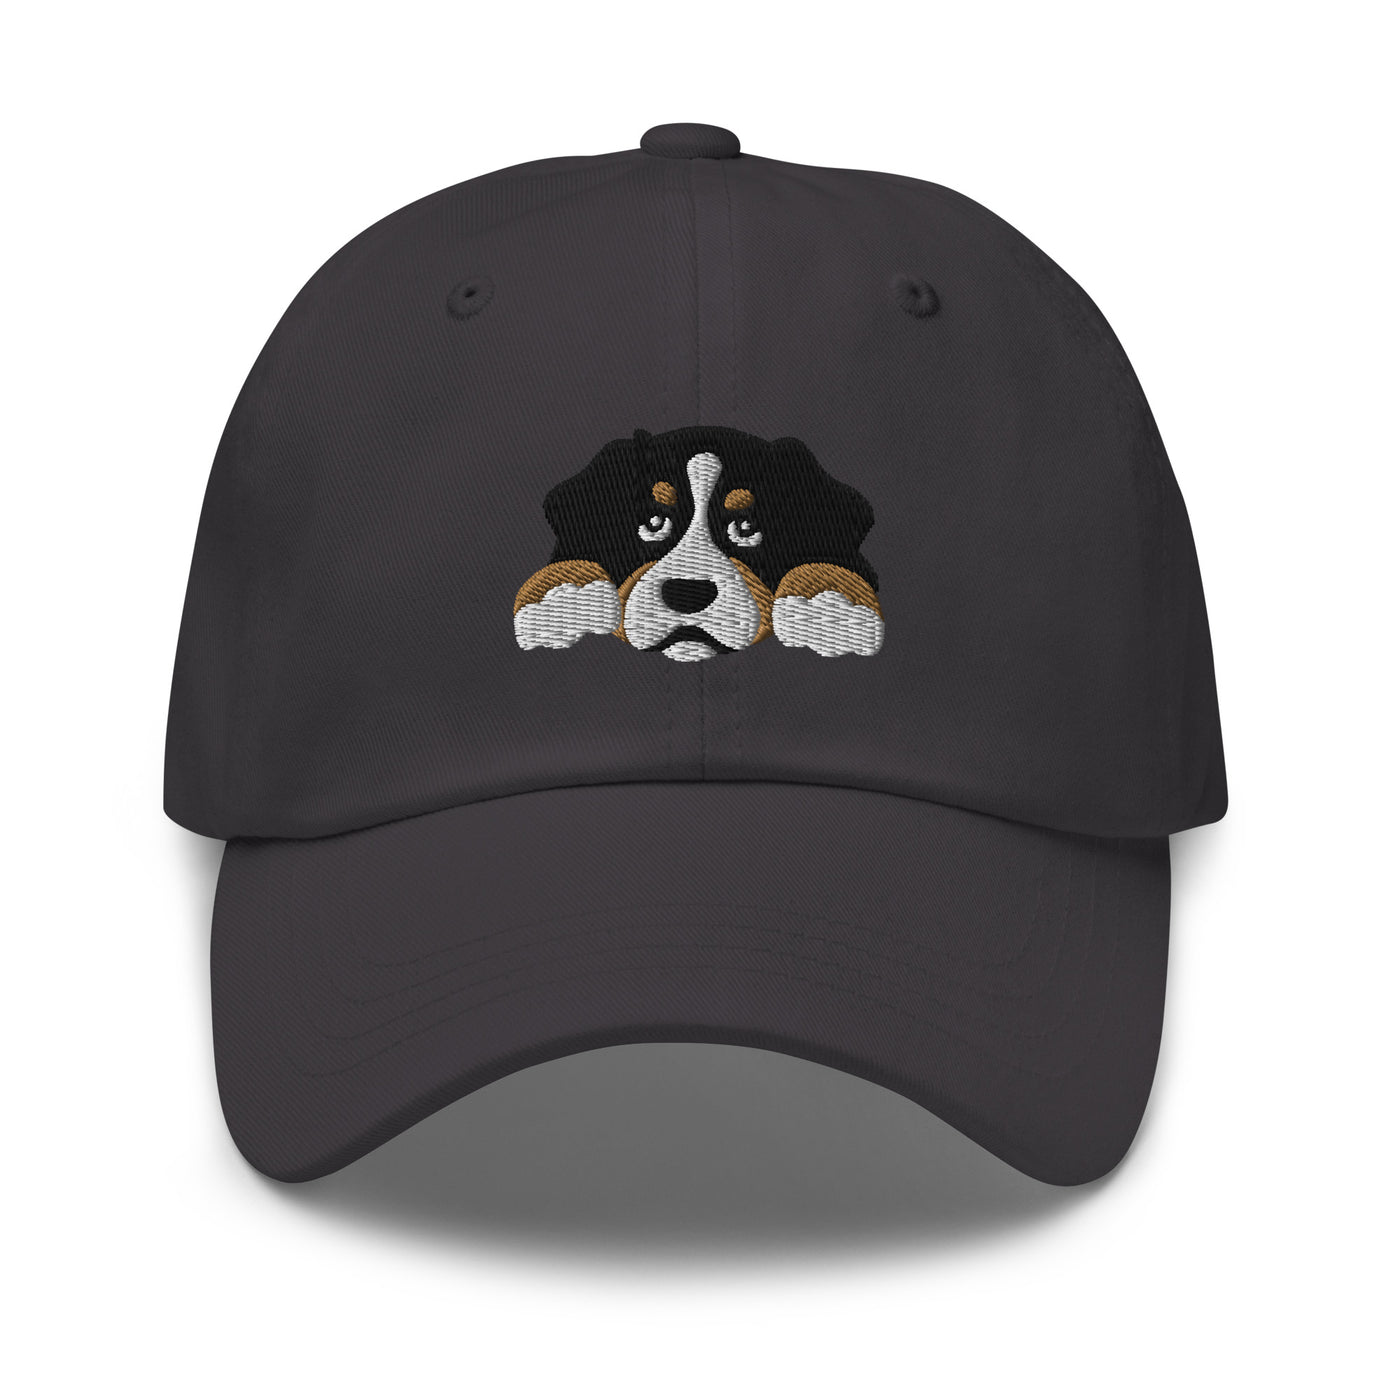 Bernese mountain dog embroidered hat